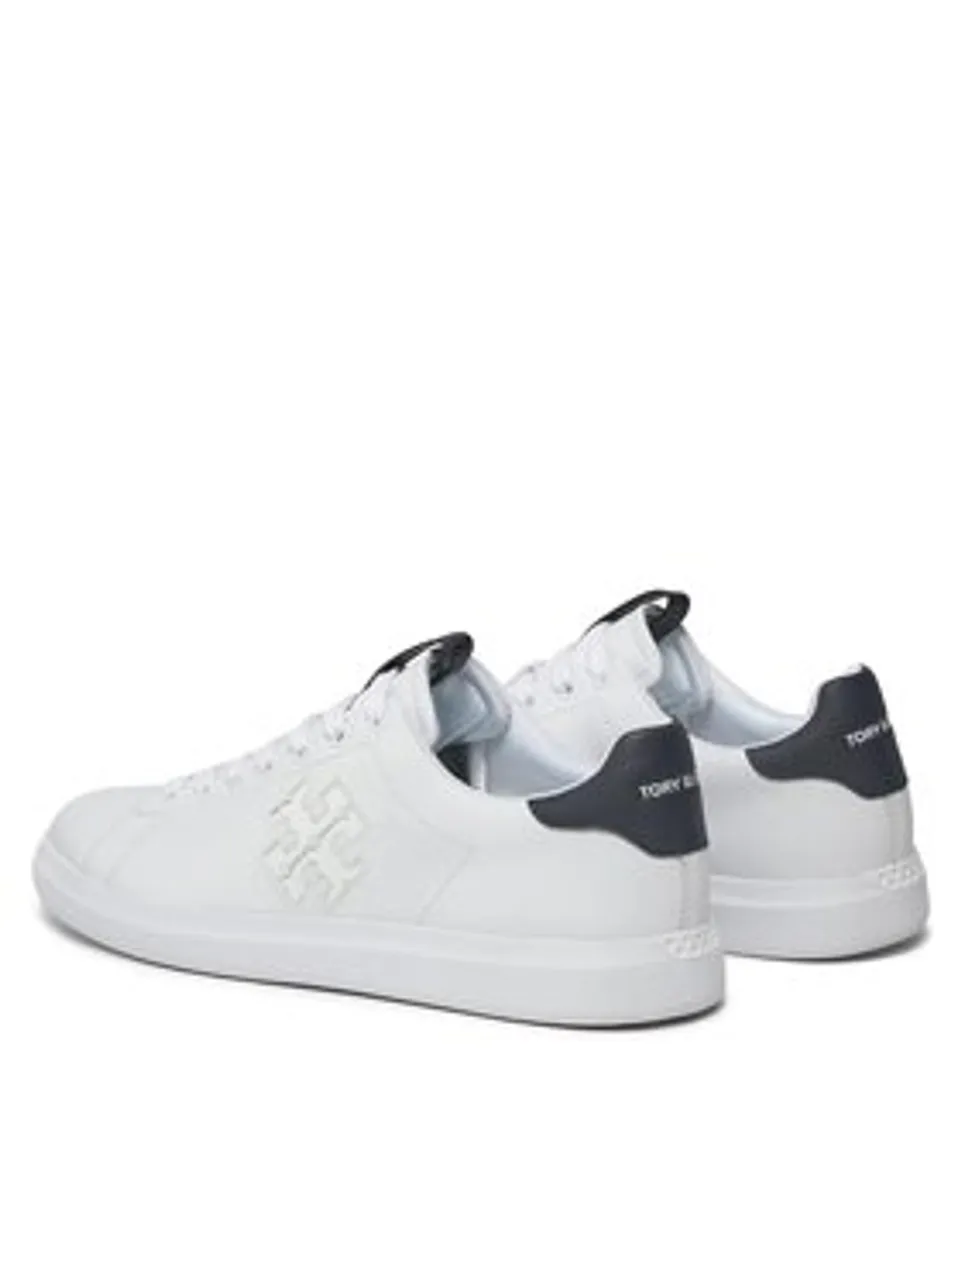 Tory Burch Sneakers Double T Howell Court 149728 Weiß